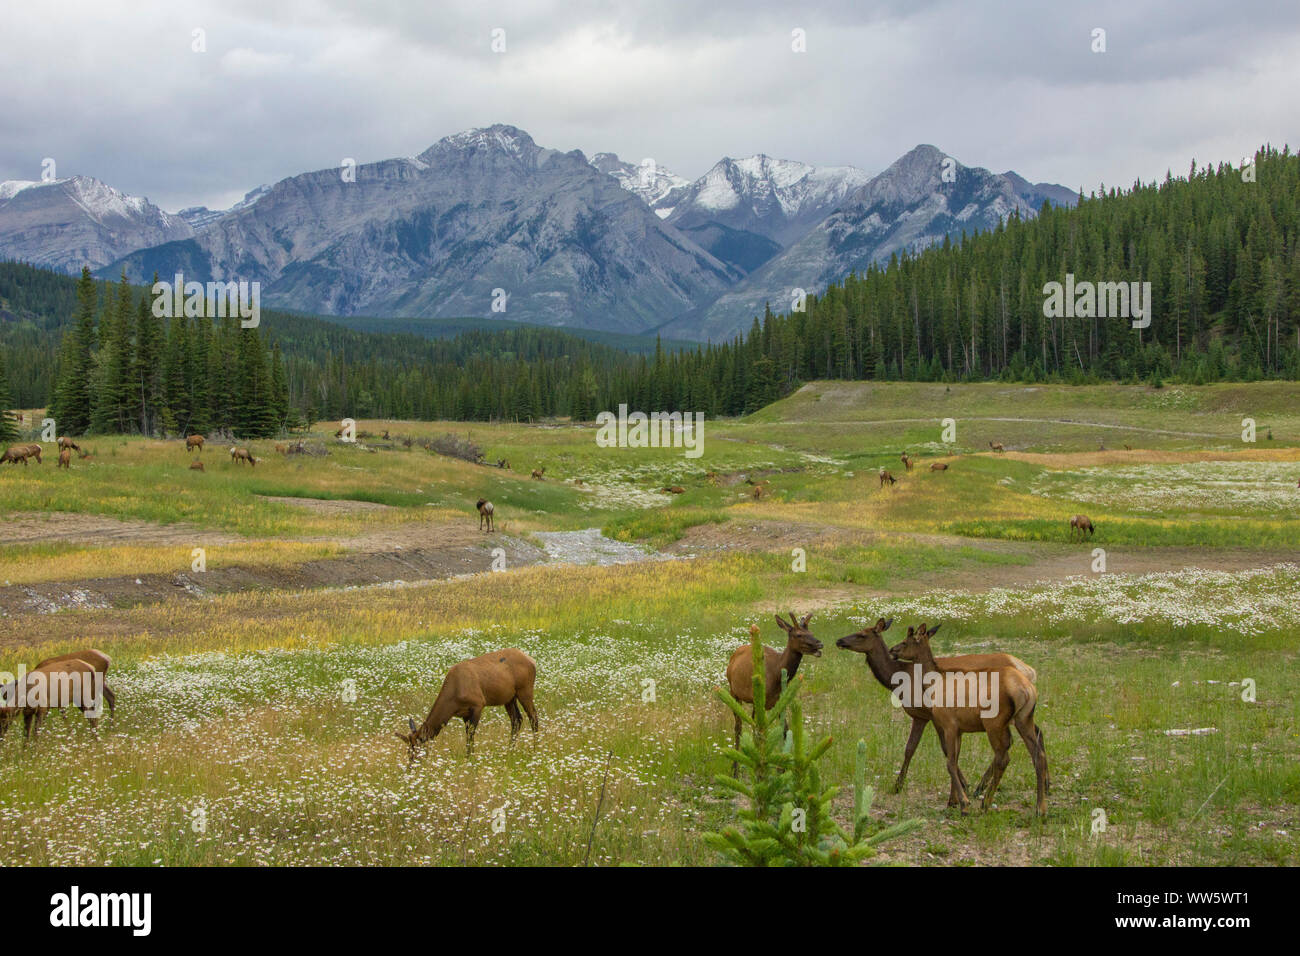 Wapitis (Cervus canadensis) grazing on a meadow at the foot of the Rocky Mountains, a river flowing through the valley Stock Photo